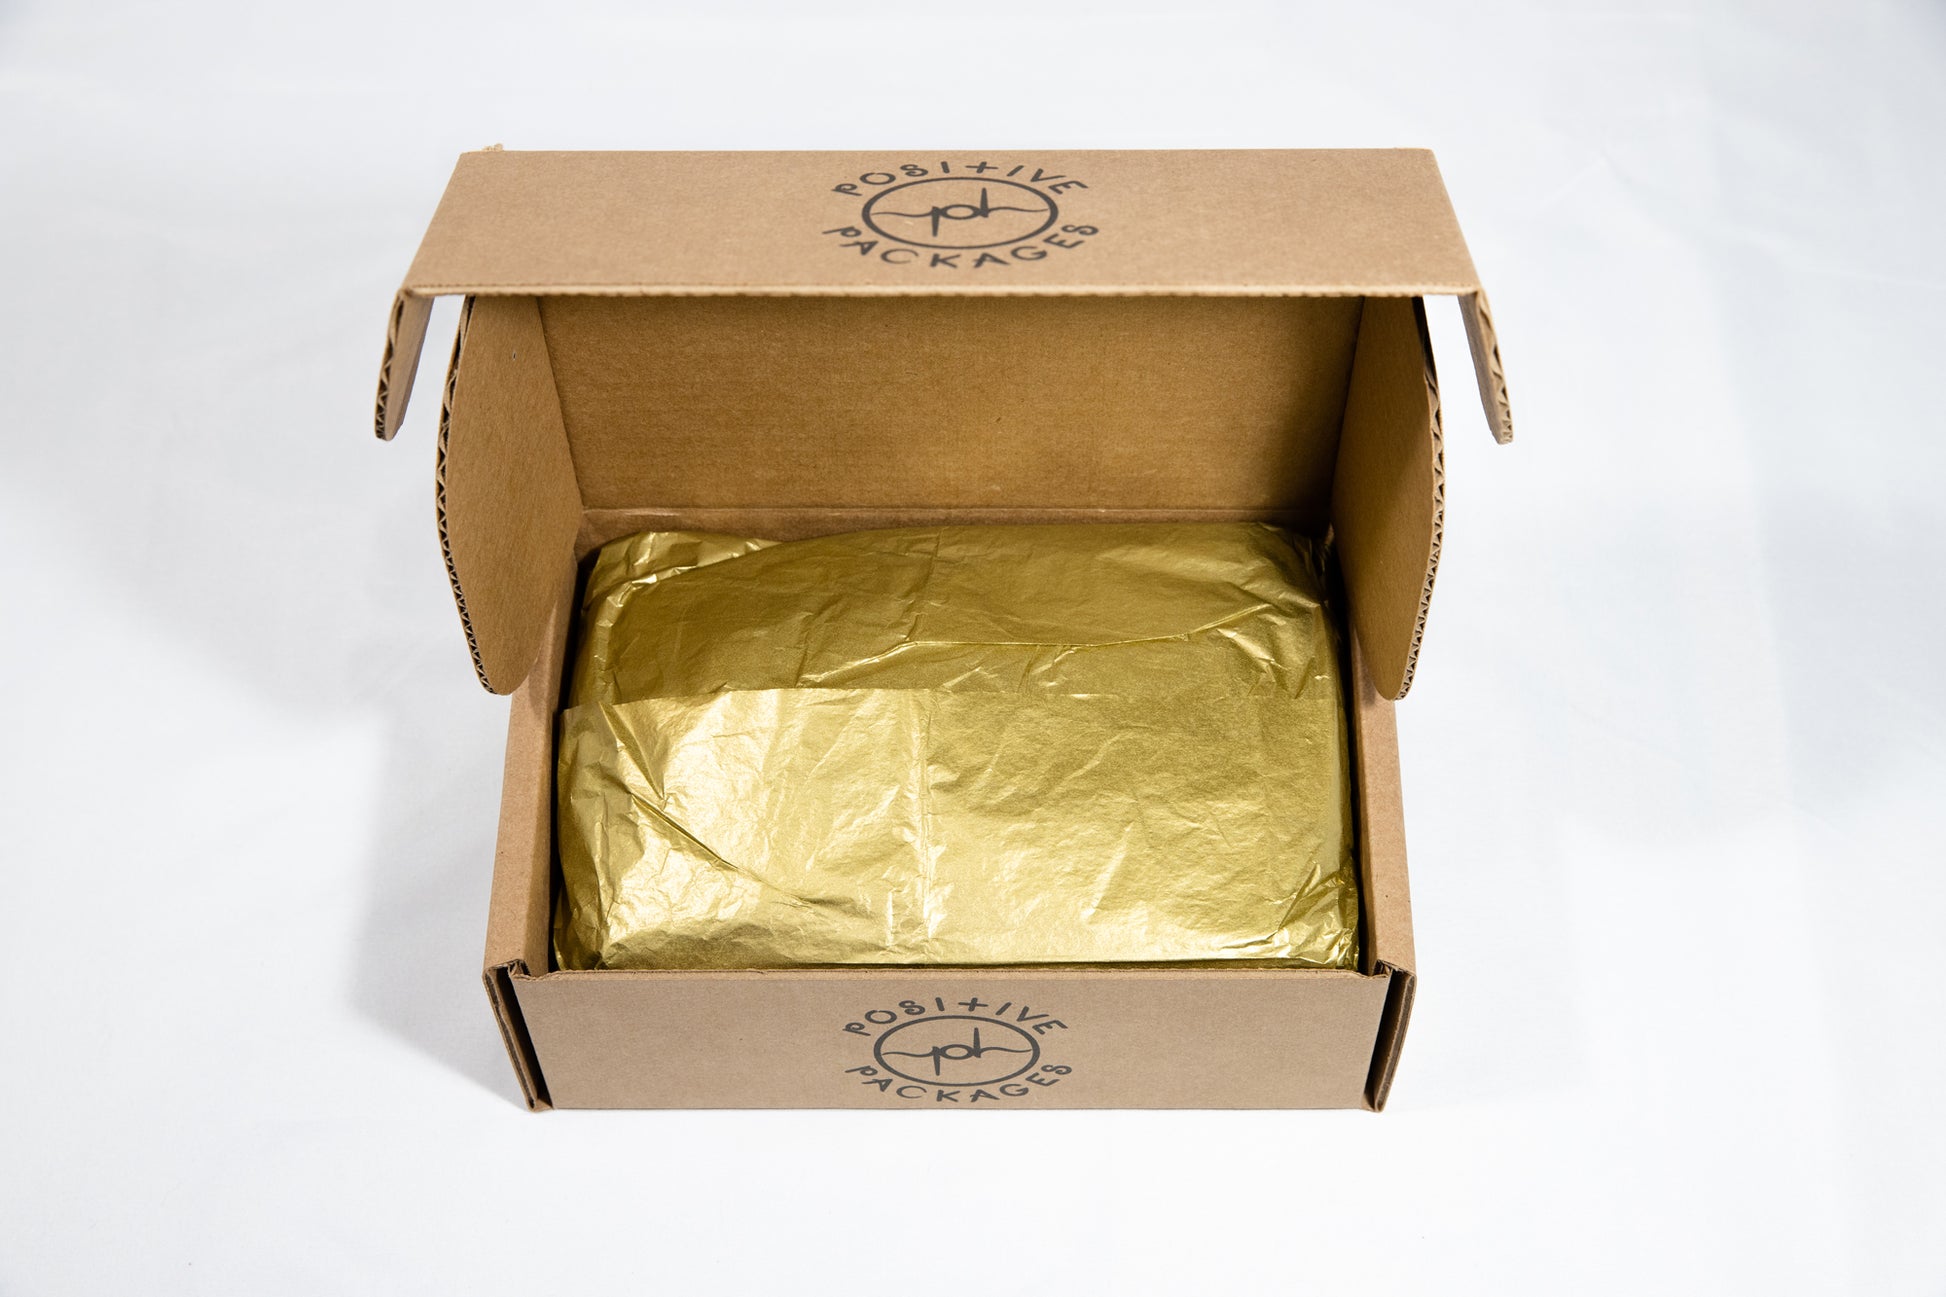 Gold tissue paper wraps each Pampering Positive Package and its content to remind us how truly valuable we all are!